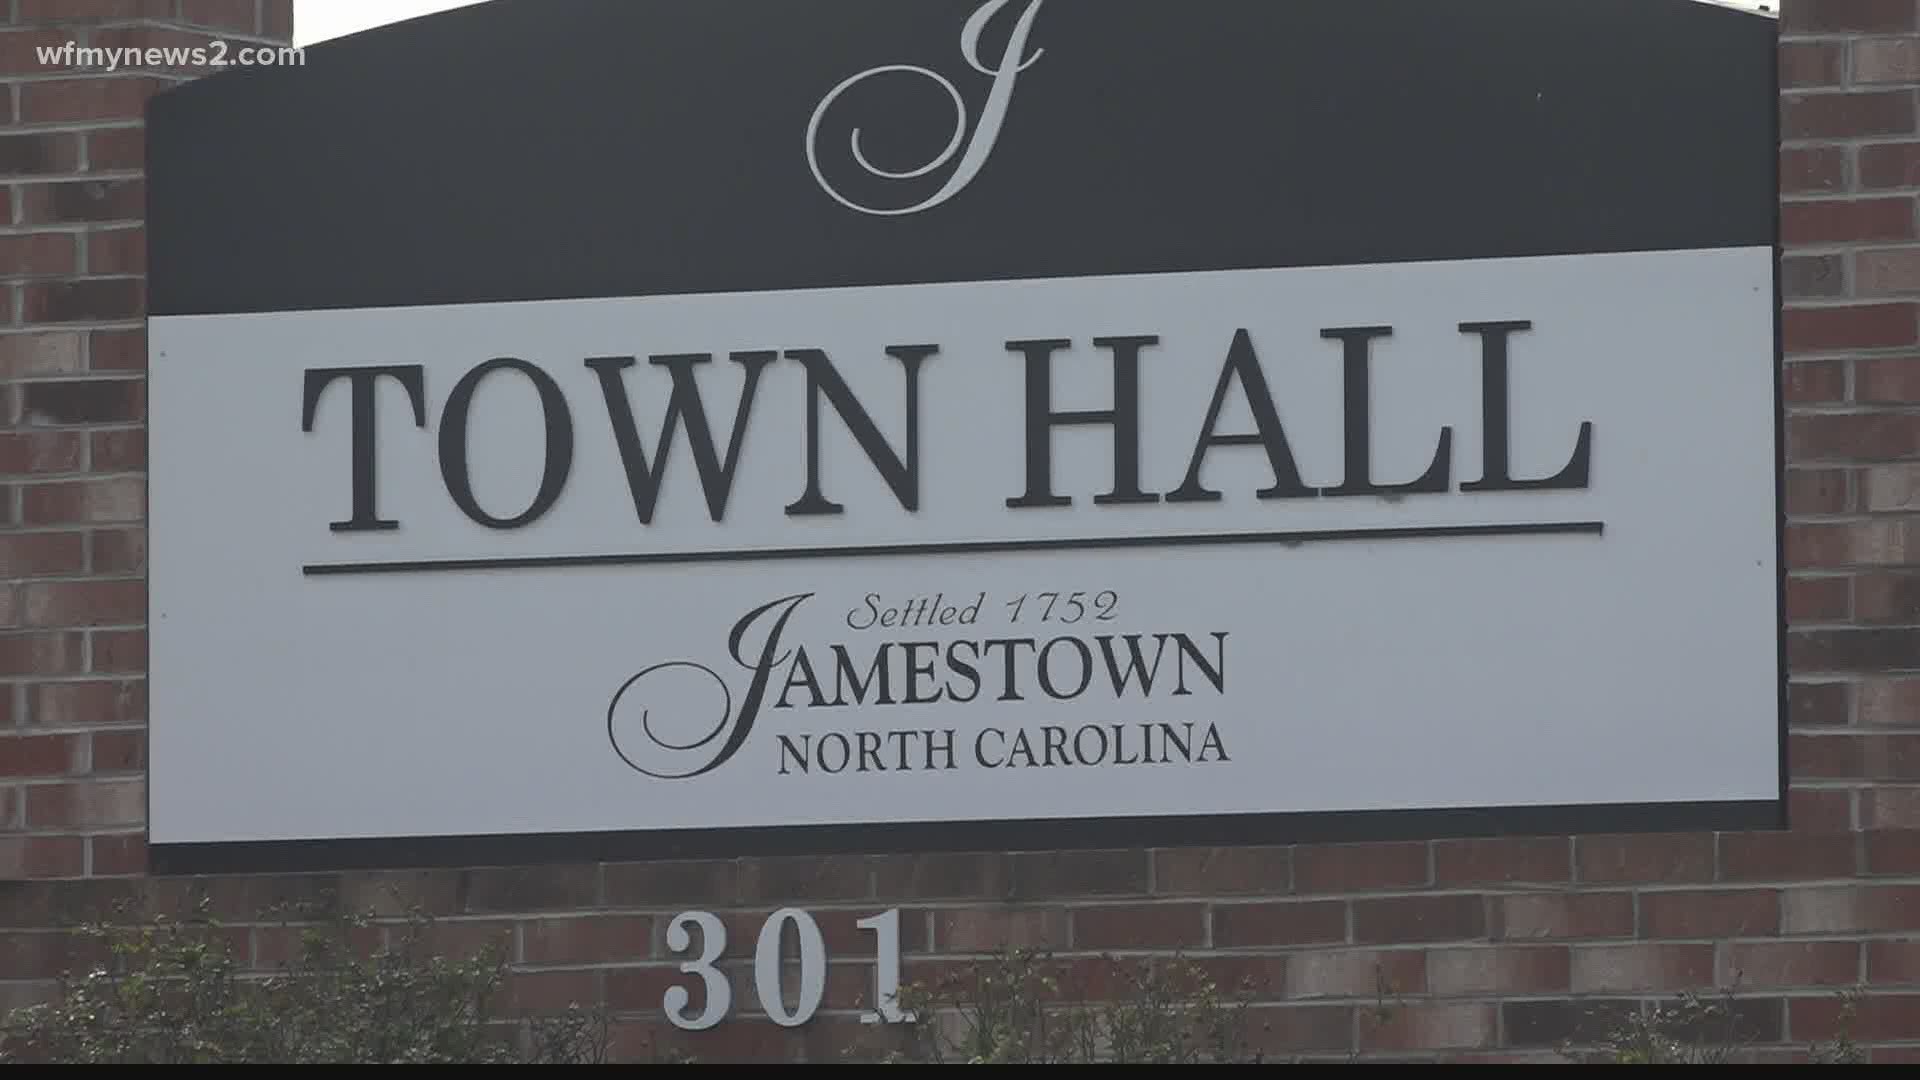 The development would nearly double the size of Jamestown's population.